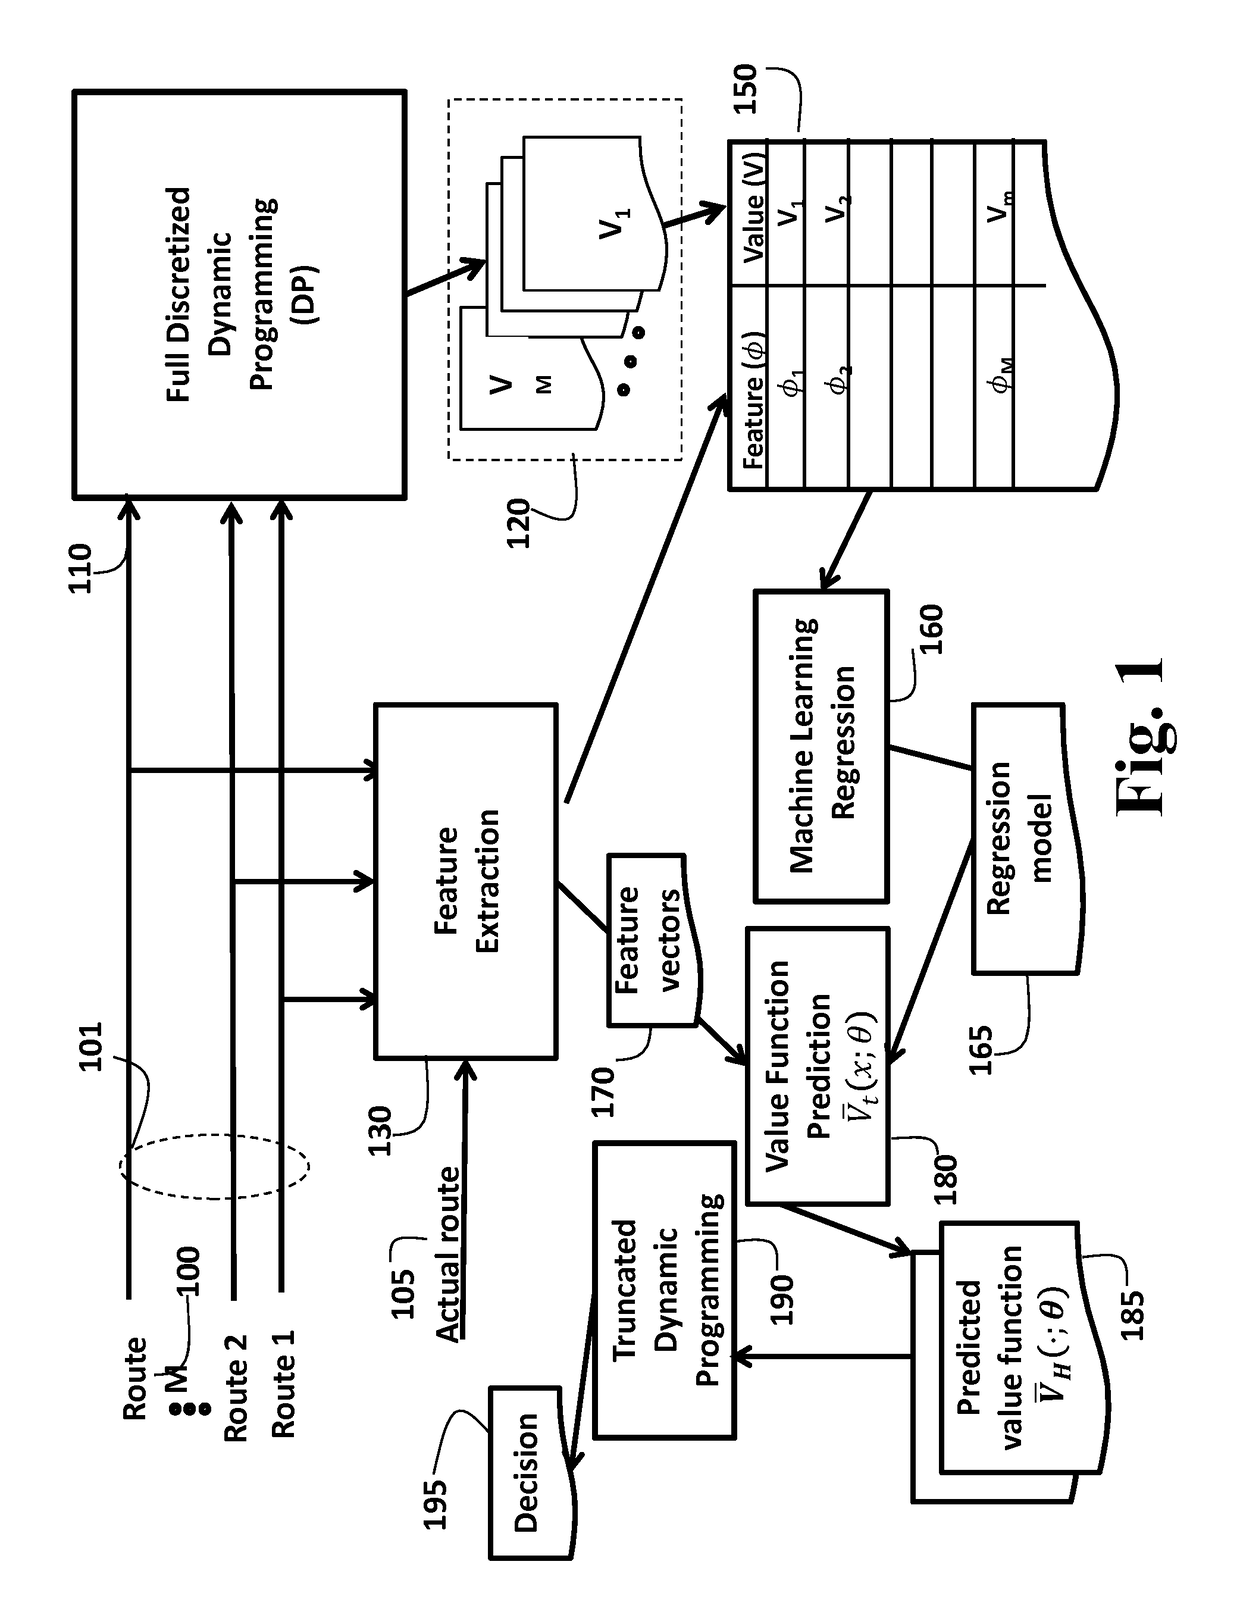 Method and system for selecting power sources in hybrid electric vehicles